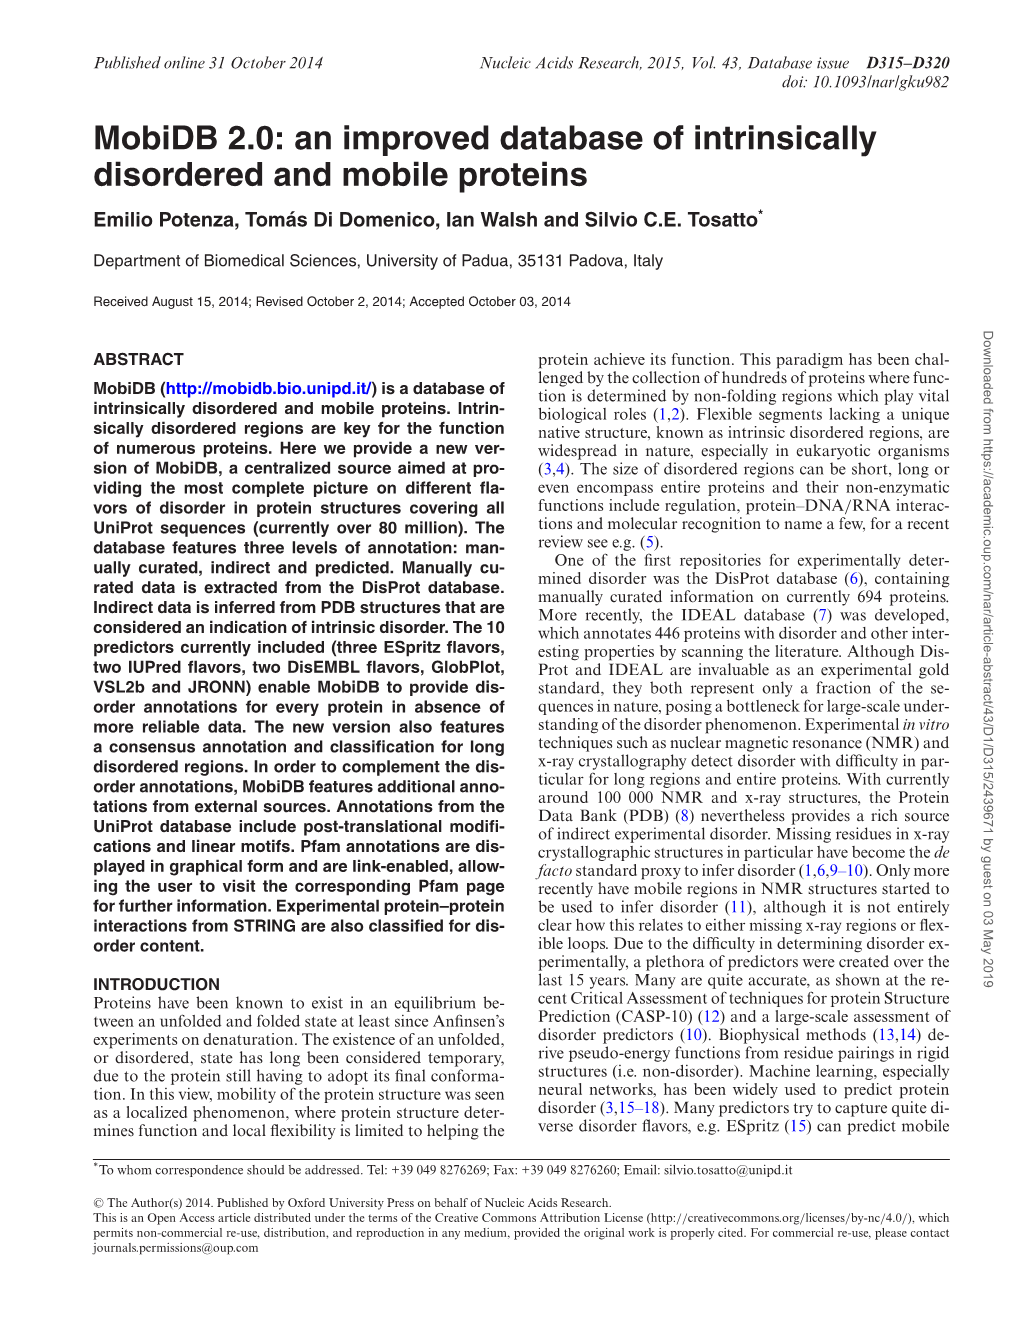 An Improved Database of Intrinsically Disordered and Mobile Proteins Emilio Potenza, Tomas´ Di Domenico, Ian Walsh and Silvio C.E